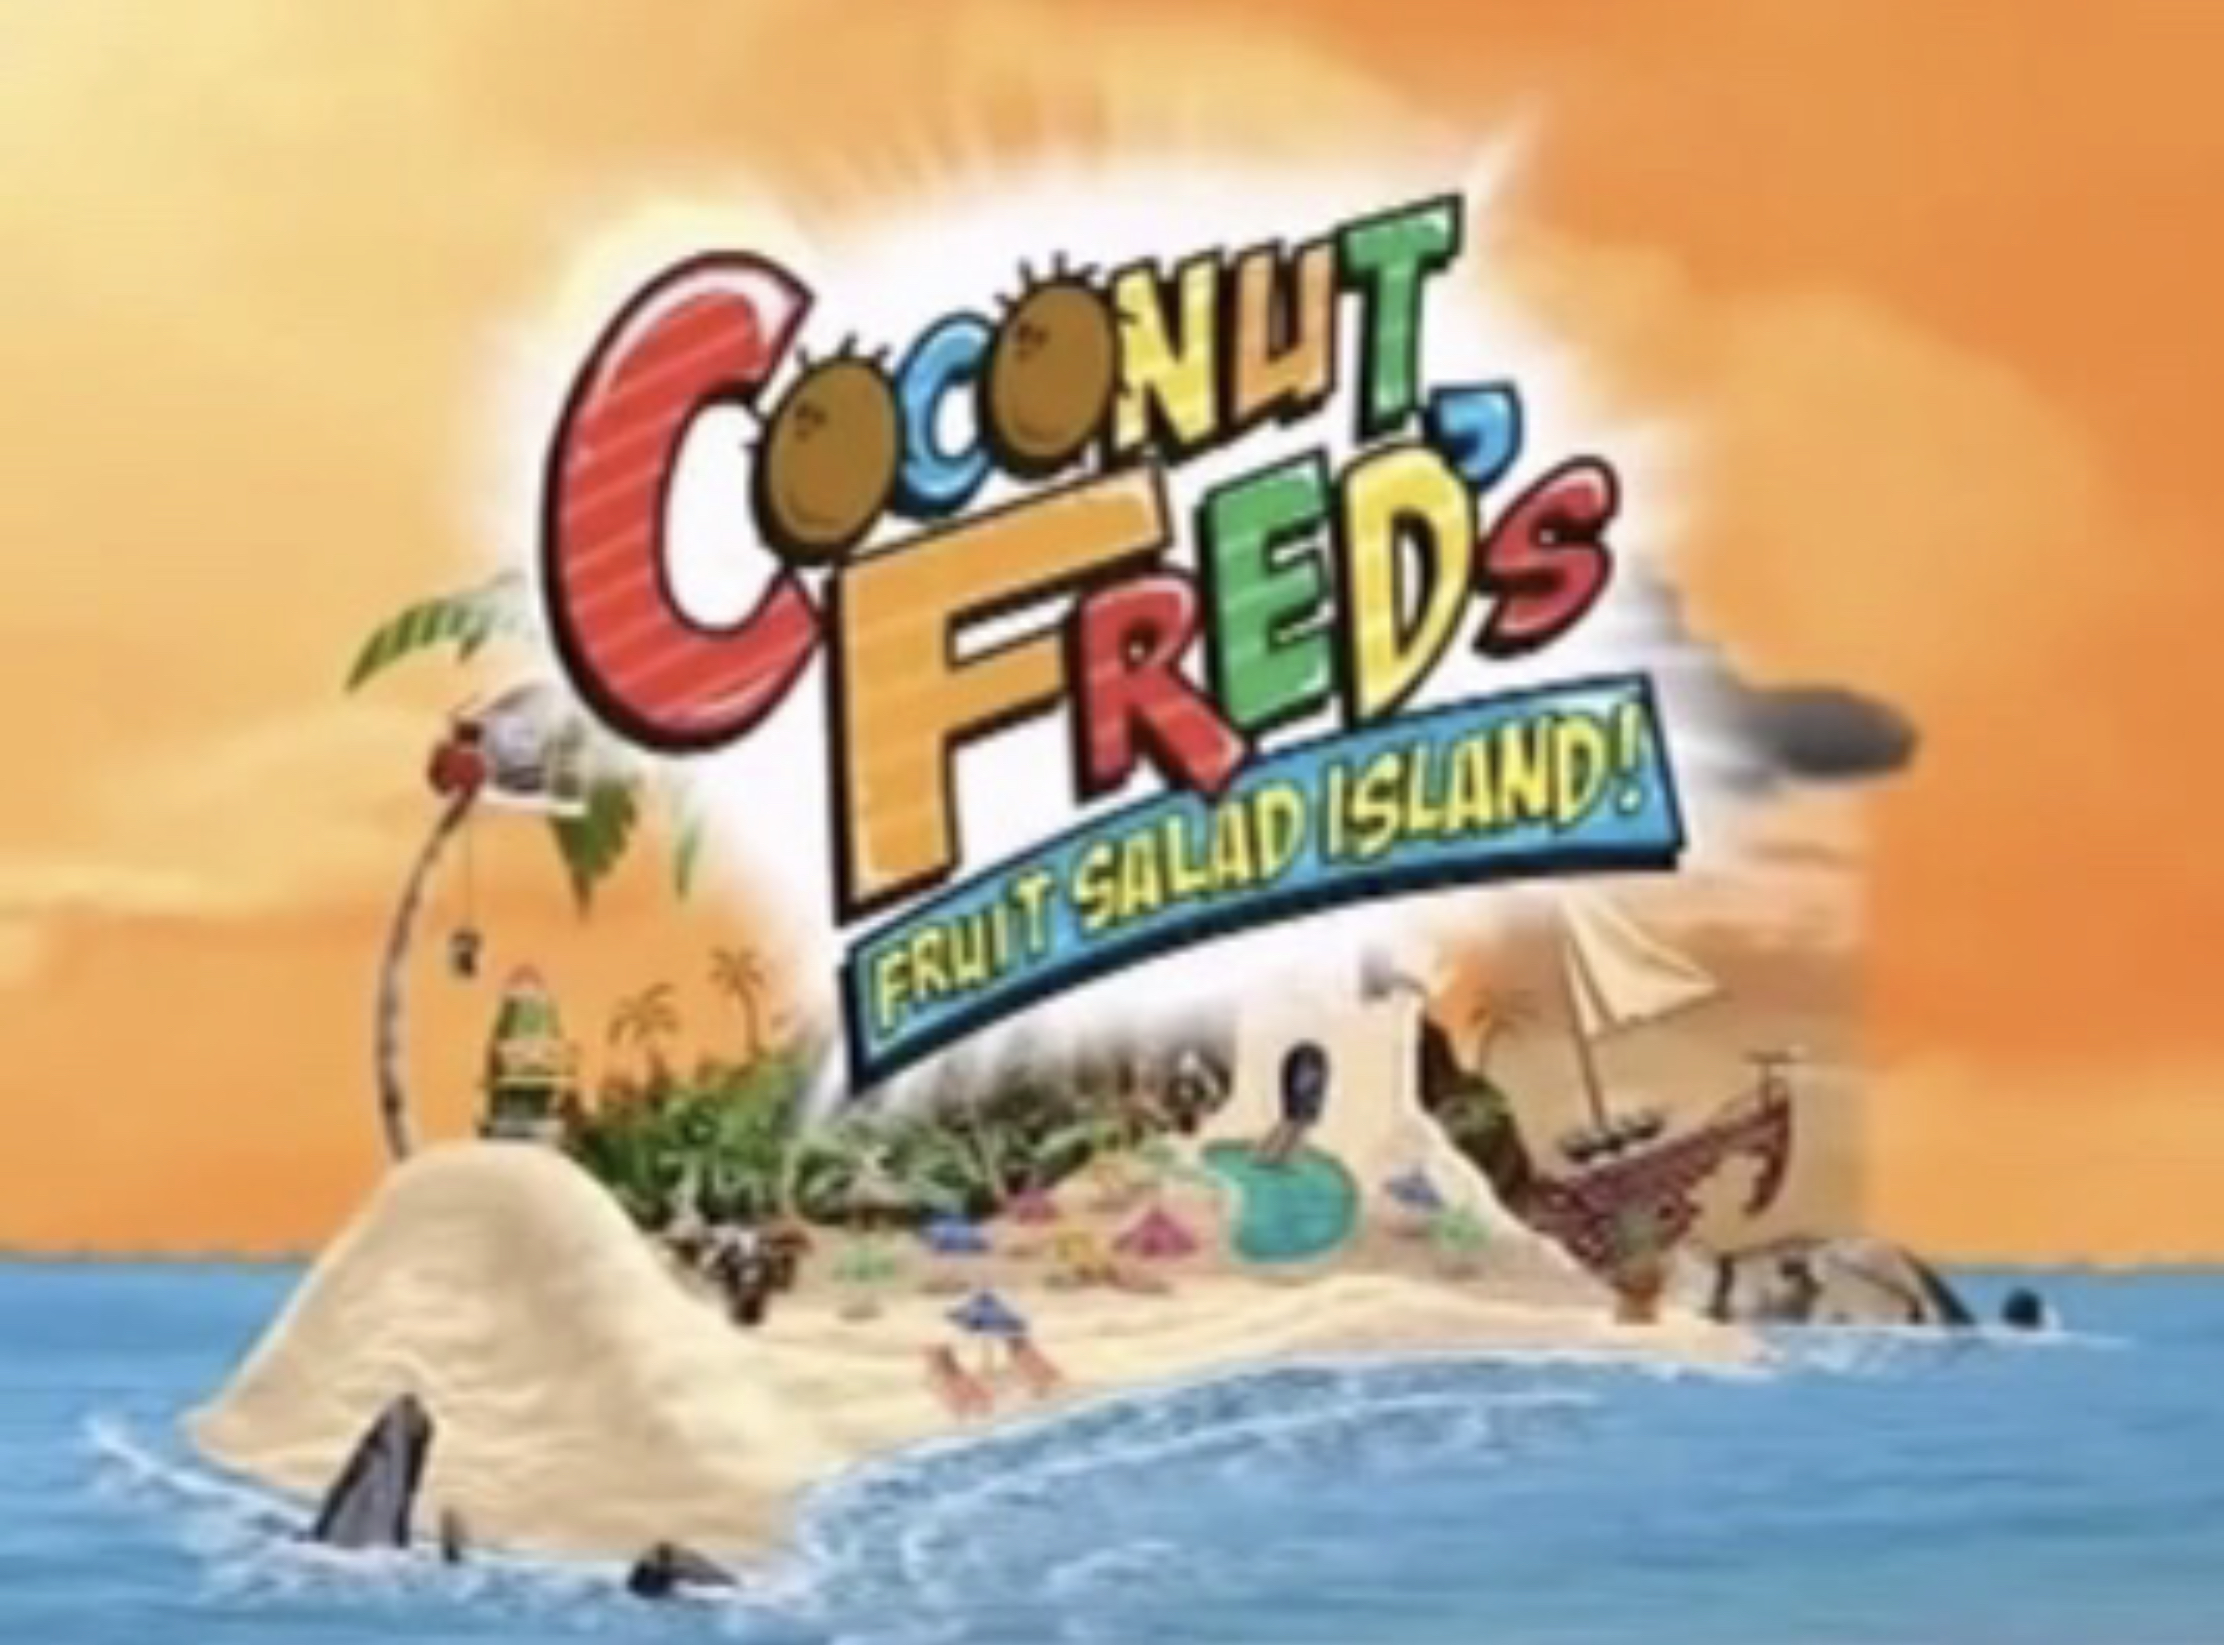 Coconut fred title card.jpeg